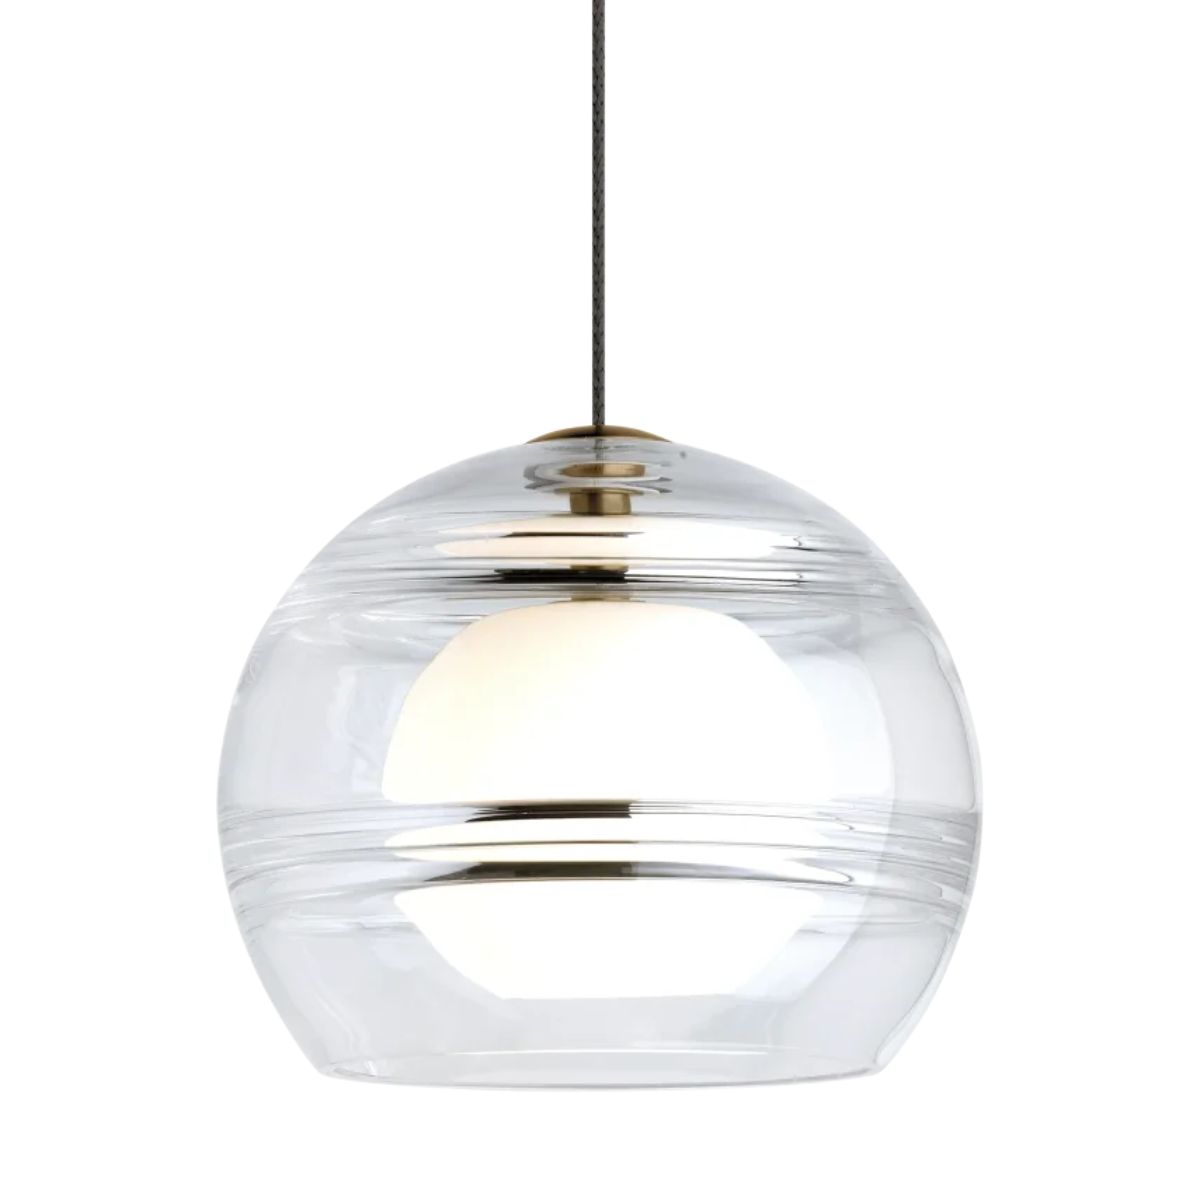 Sedona 6 in. Monorail Halogen Pendant Light Brass finish with Clear glass